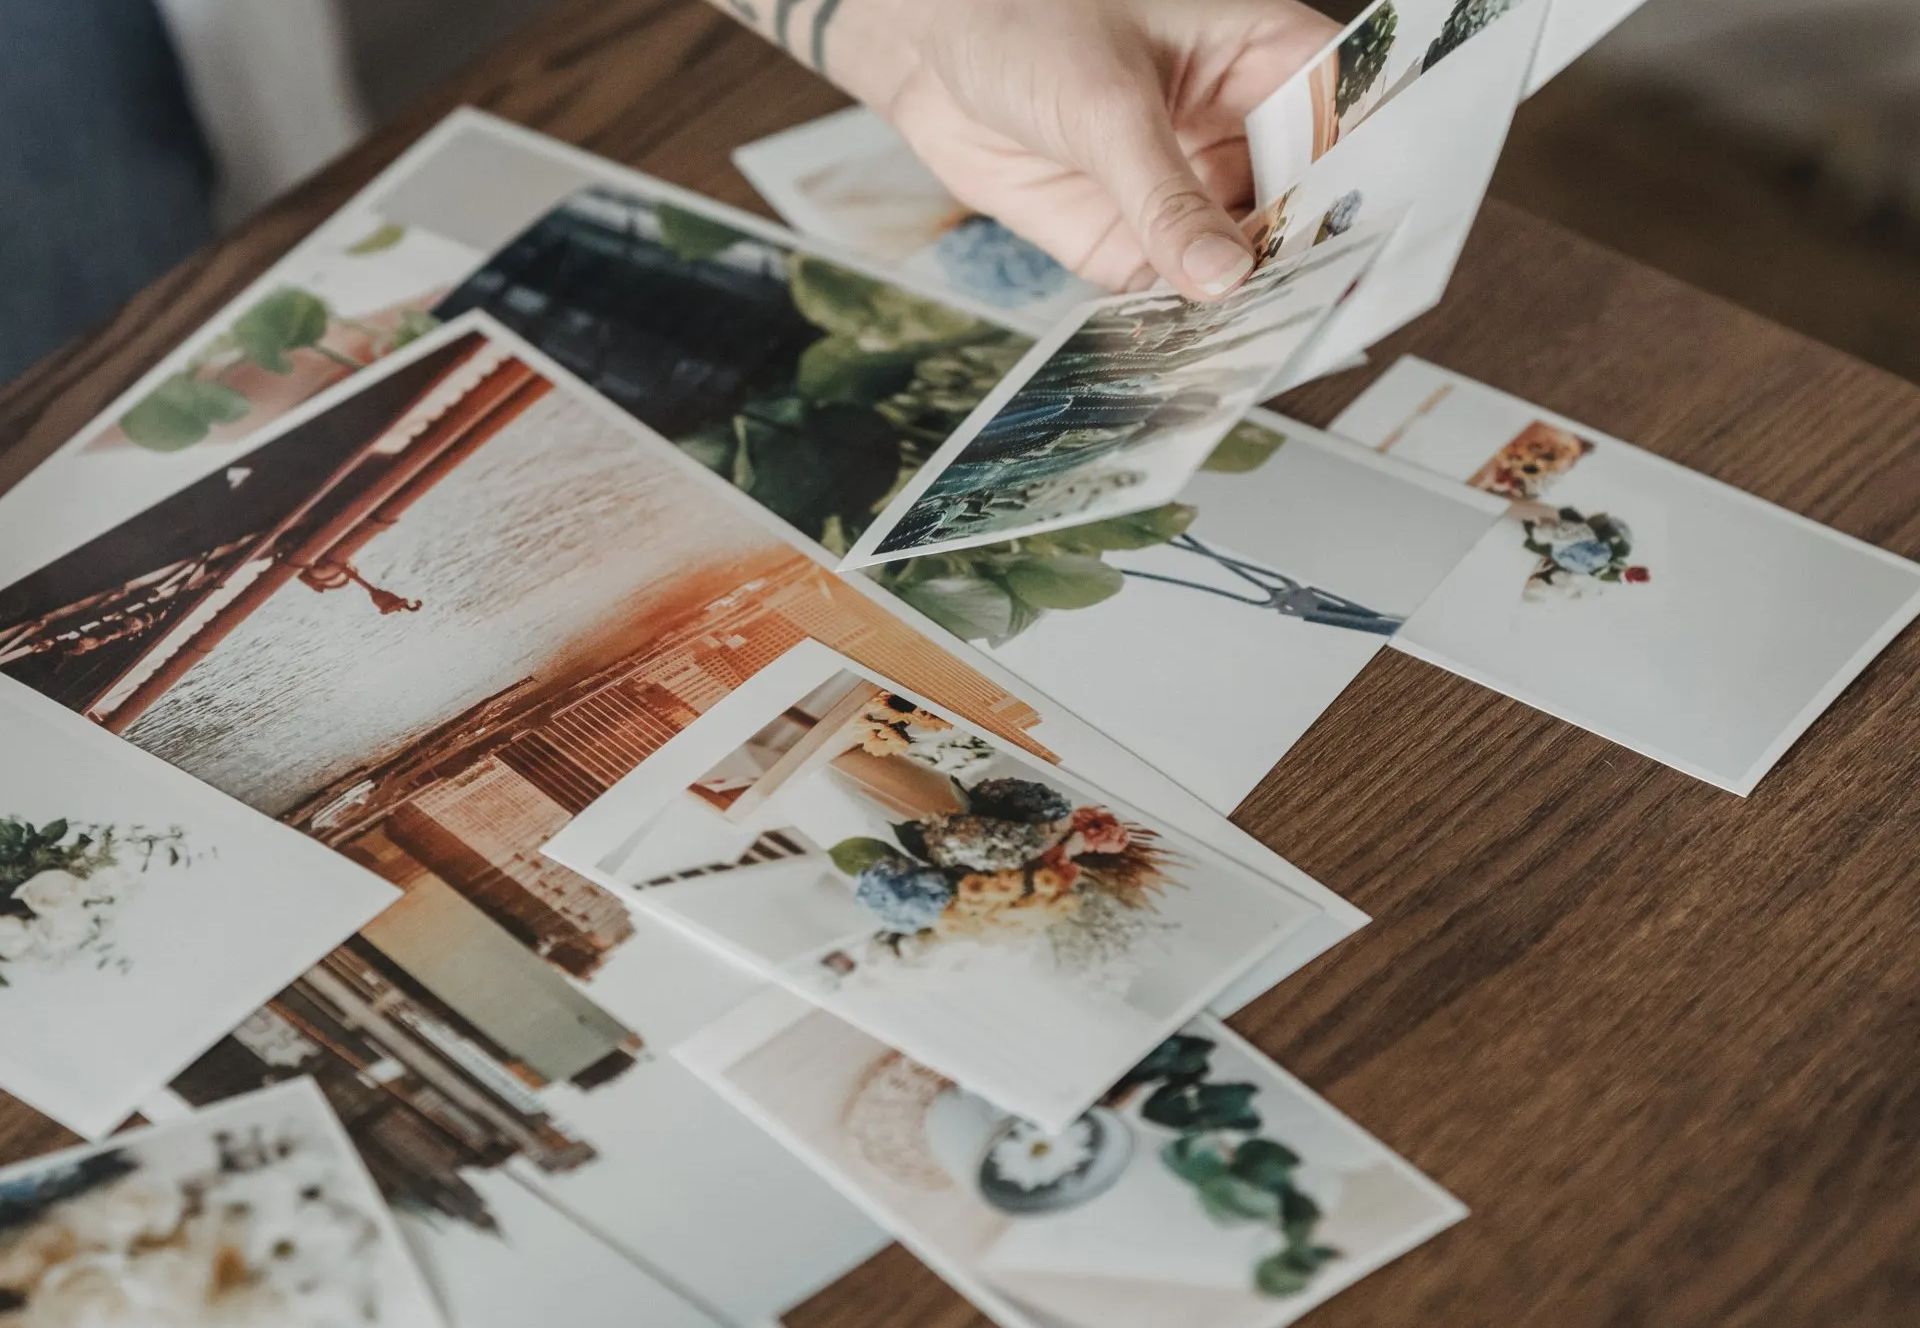 a person is holding a picture over a pile of pictures on a wooden table .